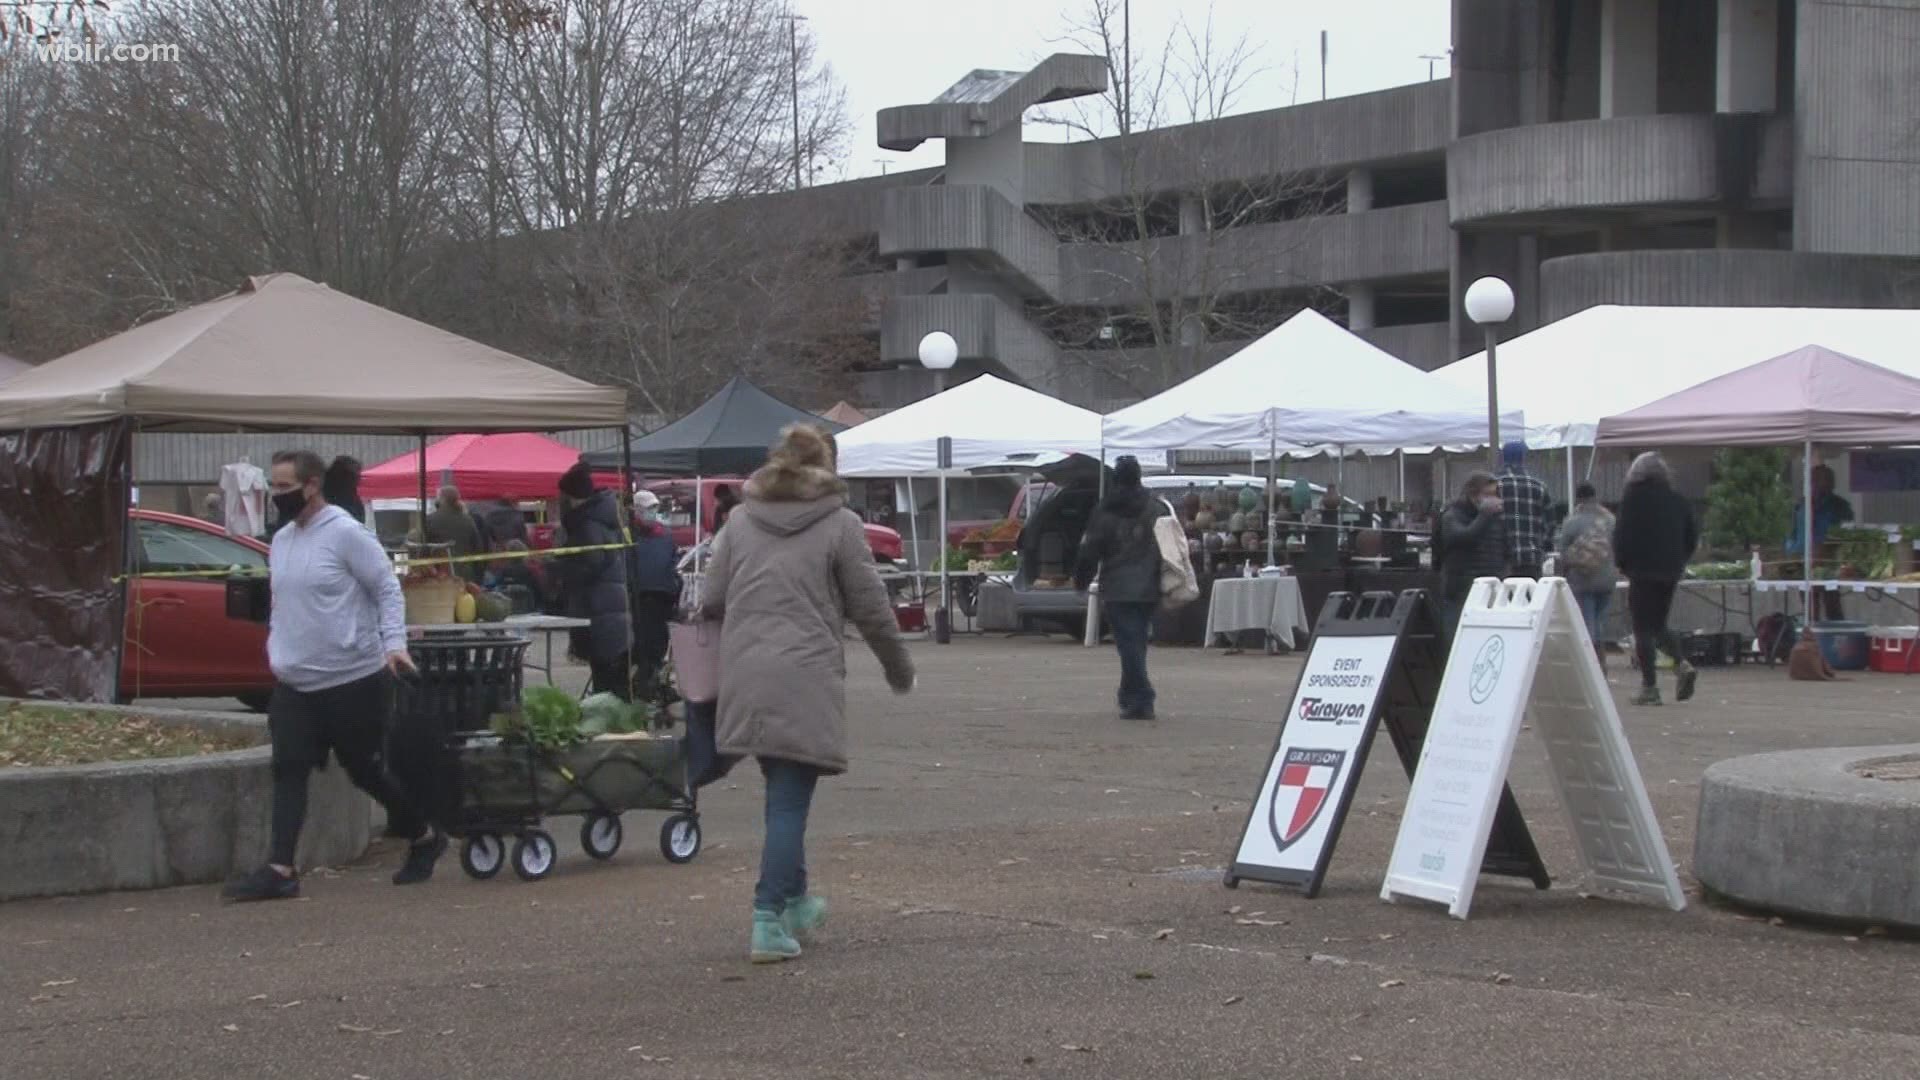 Nourish Knoxville's Winter Farmers Market kicked off today at the Mary Costa Plaza near the Civic Coliseum!